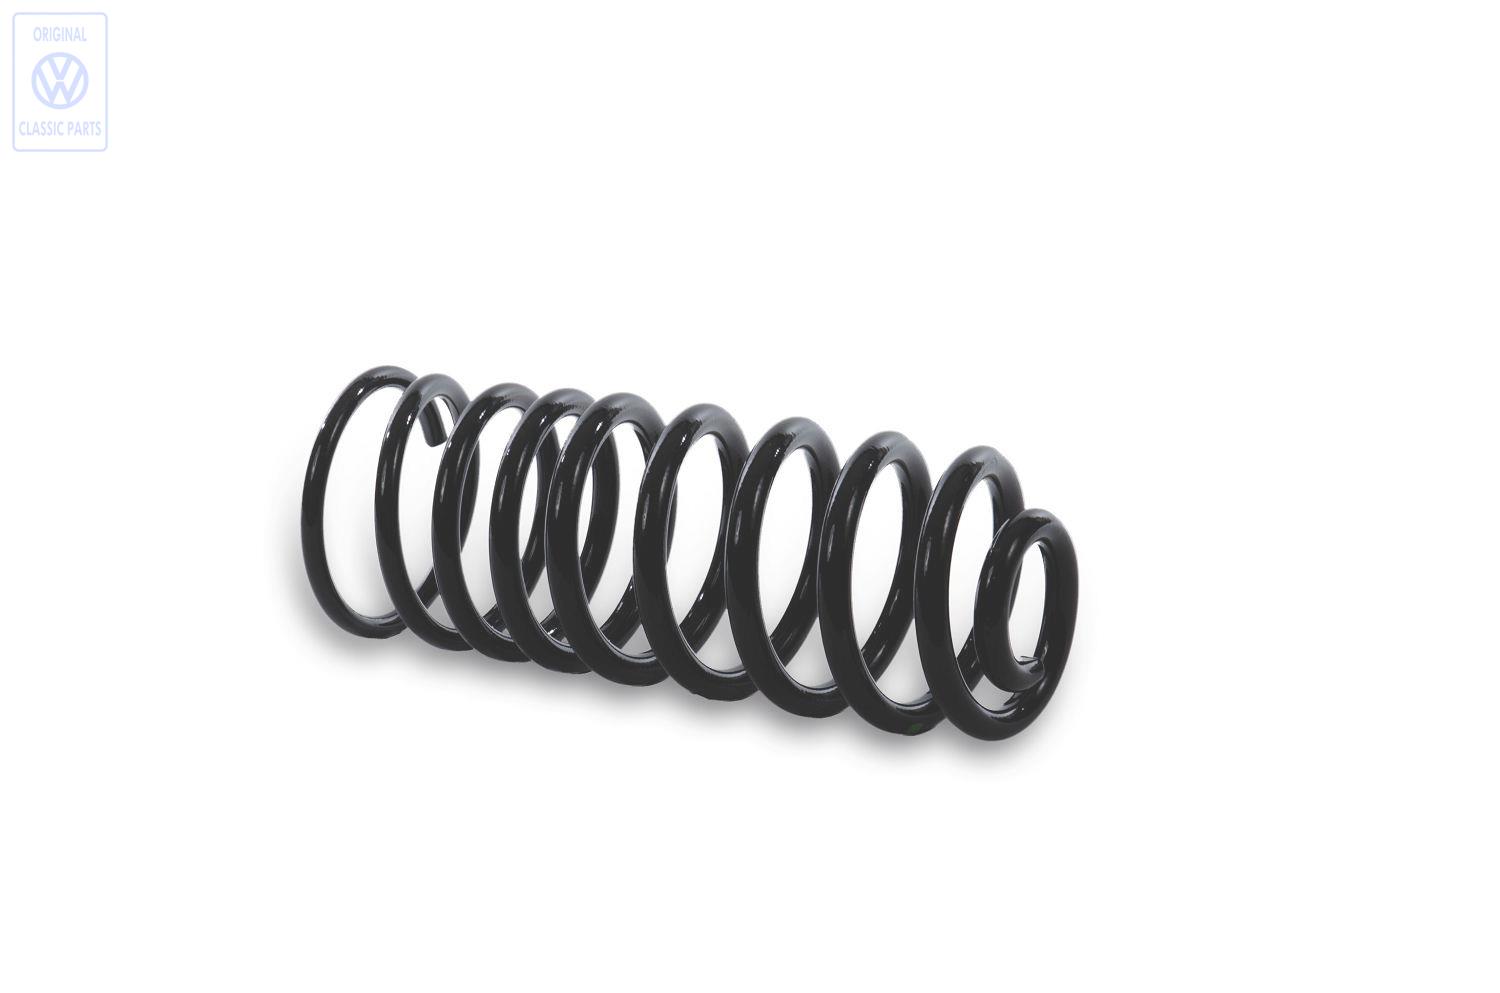 Coil spring rear for Golf Mk2 and 3 syncro